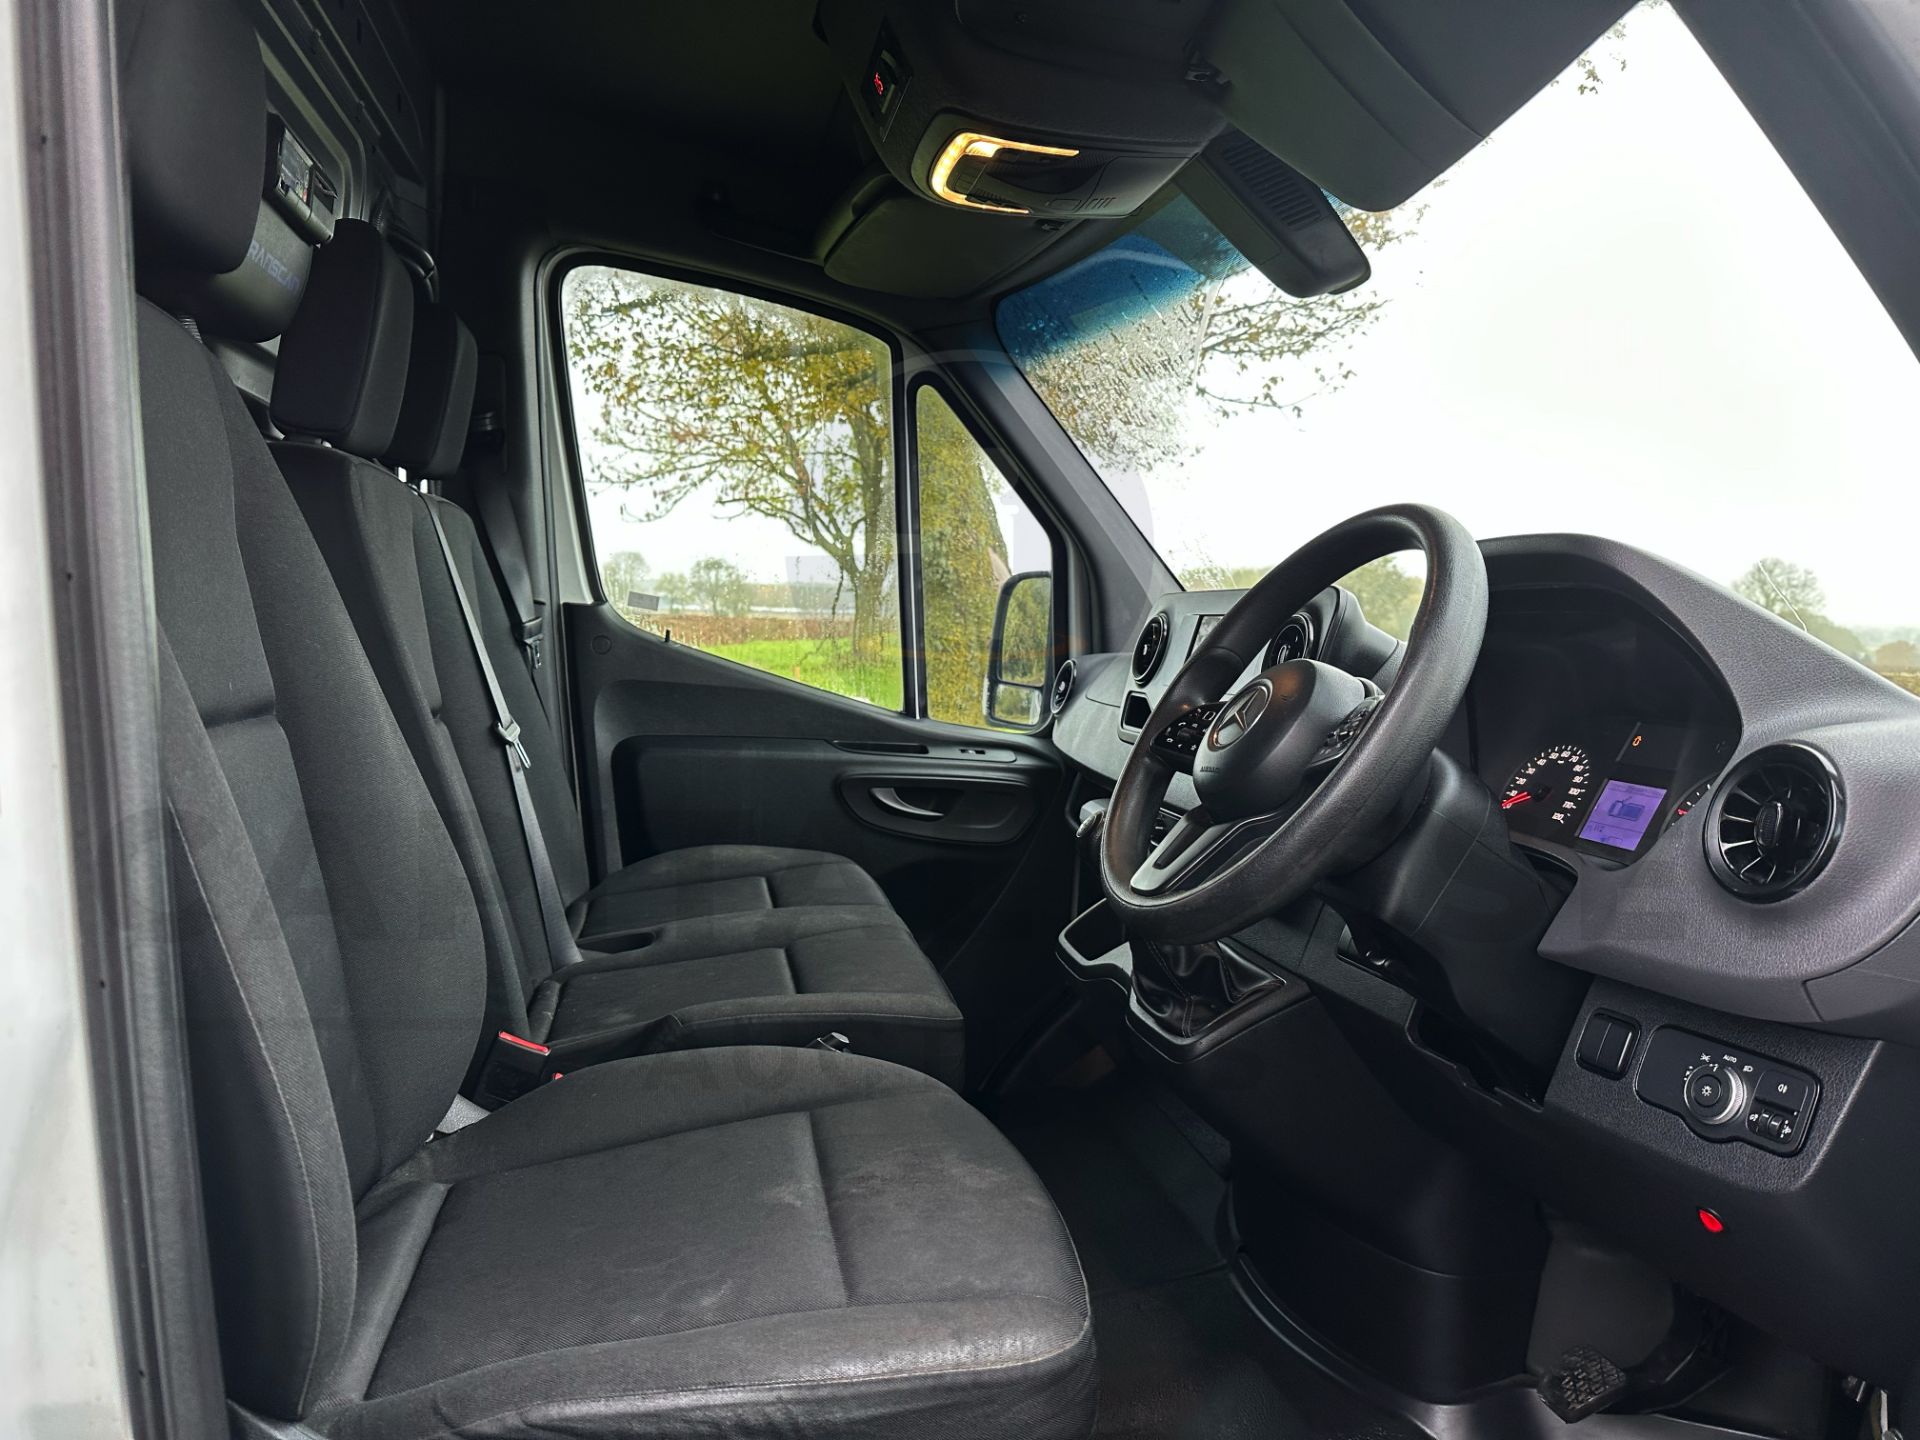 MERCEDES-BENZ SPRINTER 314 CDI *MWB - REFRIGERATED VAN* (2019 - FACELIFT MODEL) *OVERNIGHT STANDBY* - Image 30 of 45